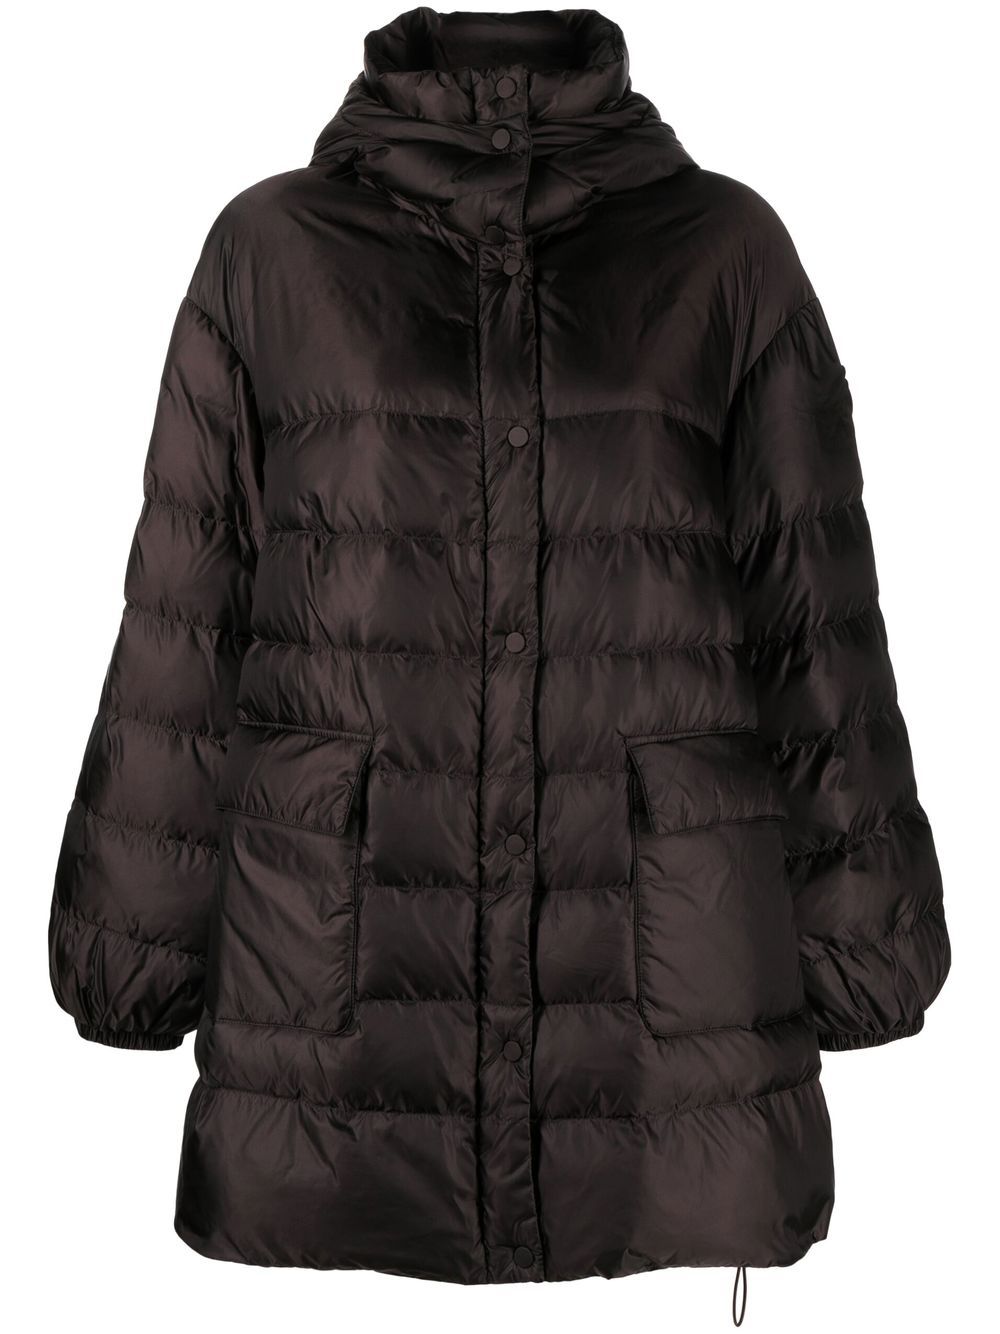 PINKO Quilted Hooded Puffer Jacket - Farfetch